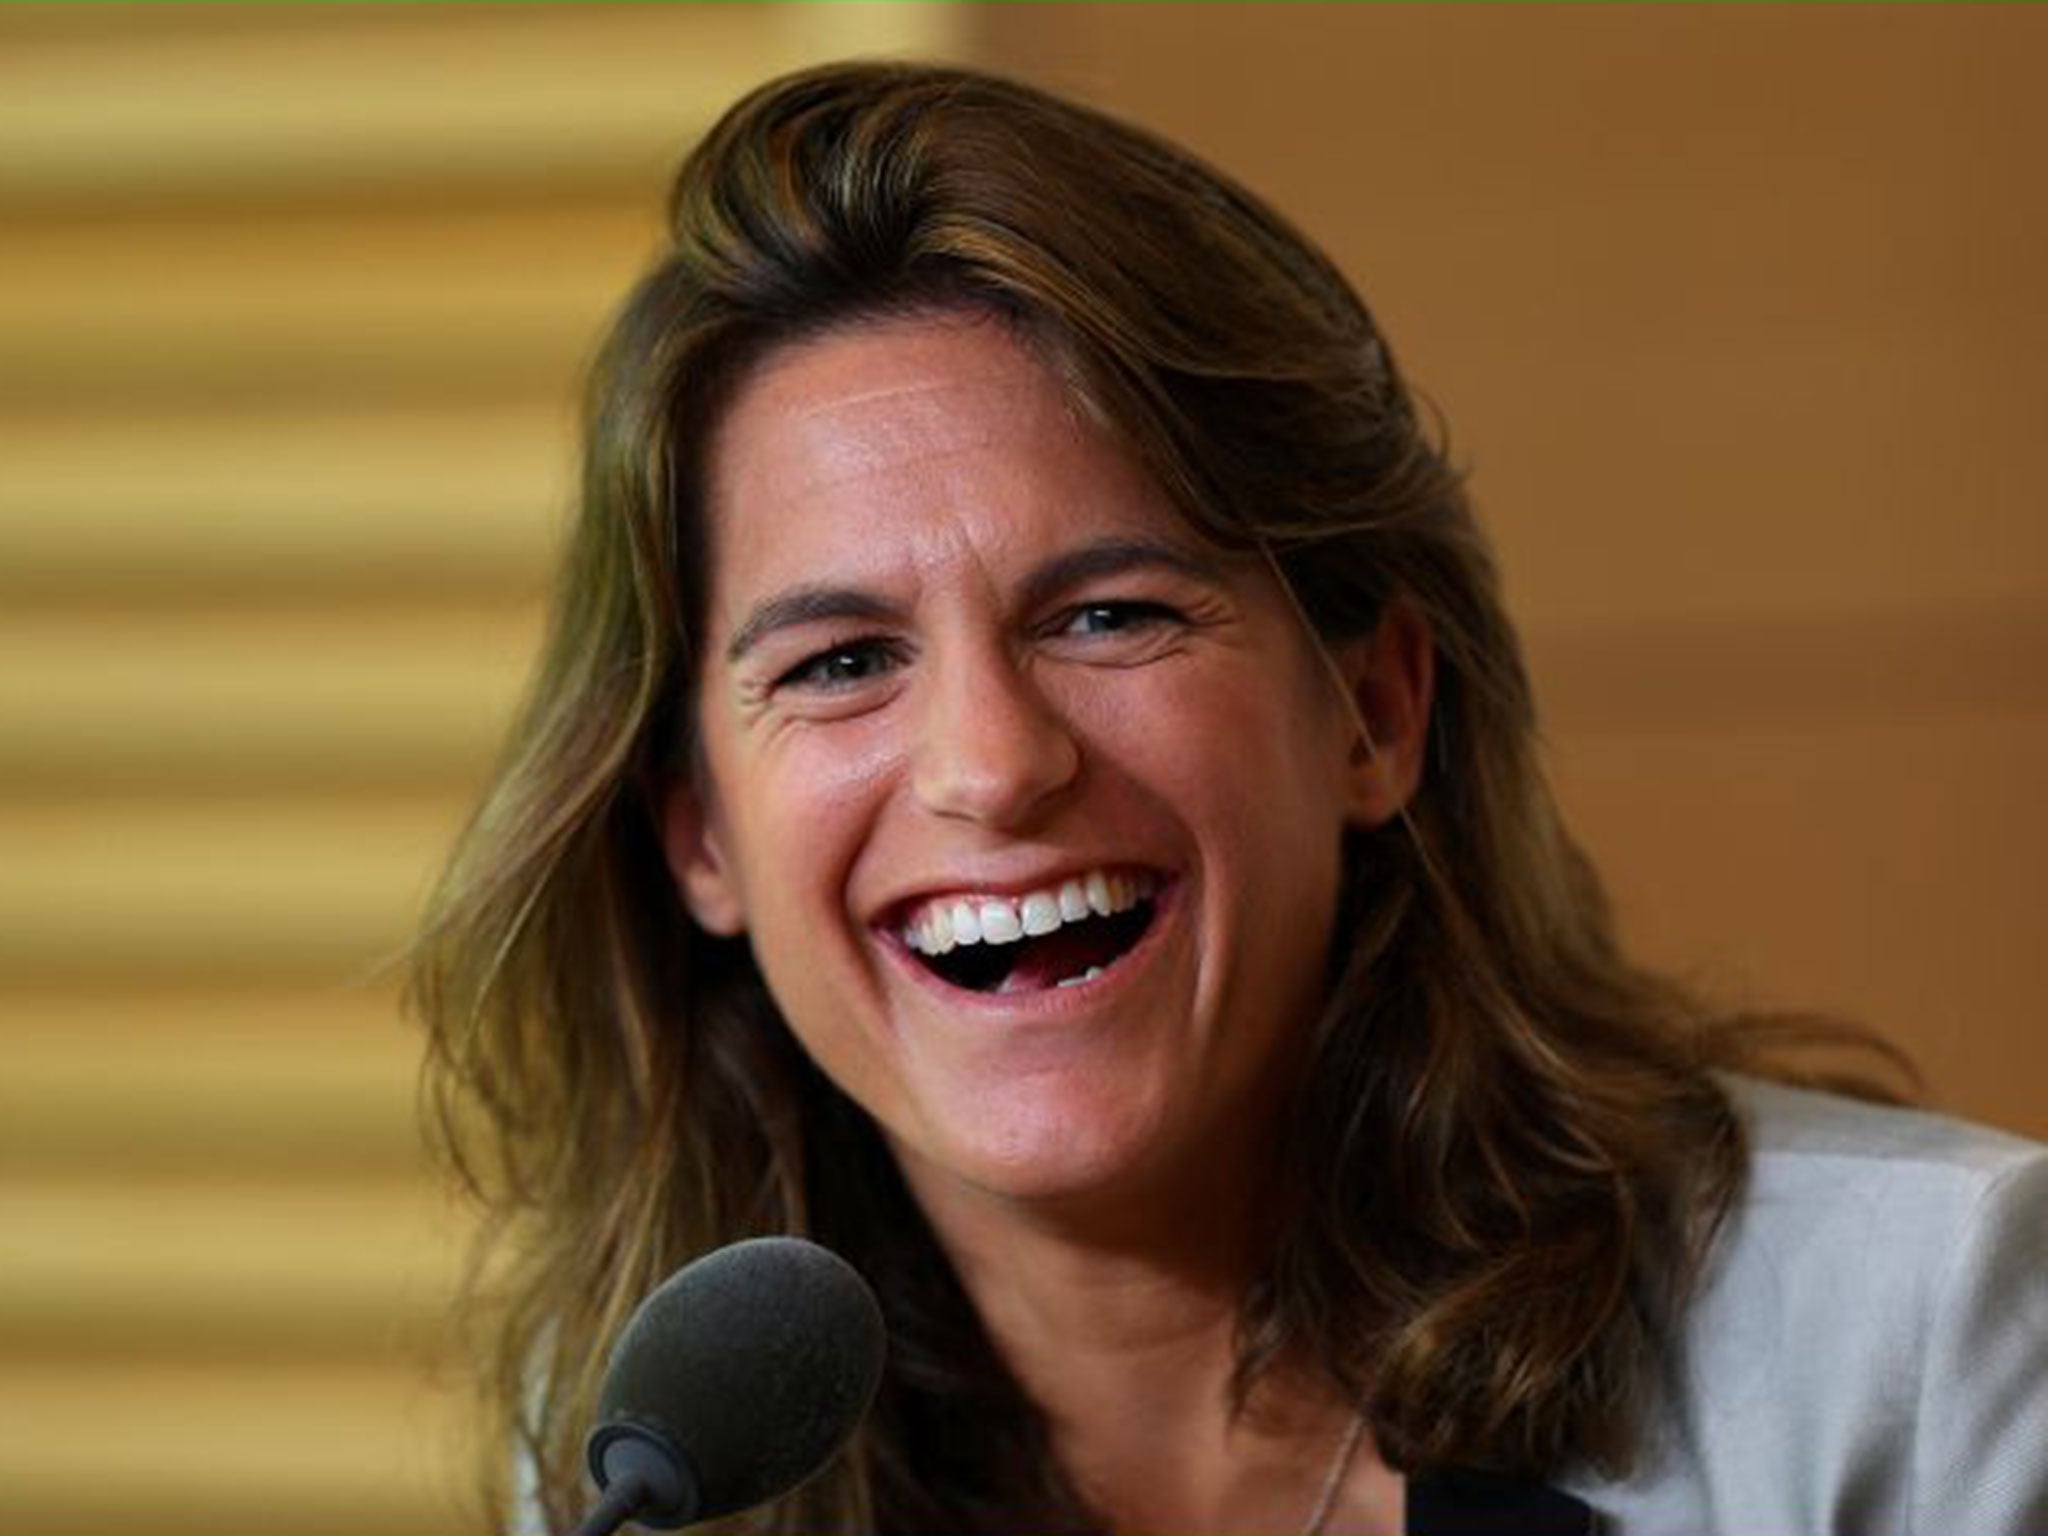 Amélie Mauresmo arrived at Queen’s for her first training session with Andy Murray